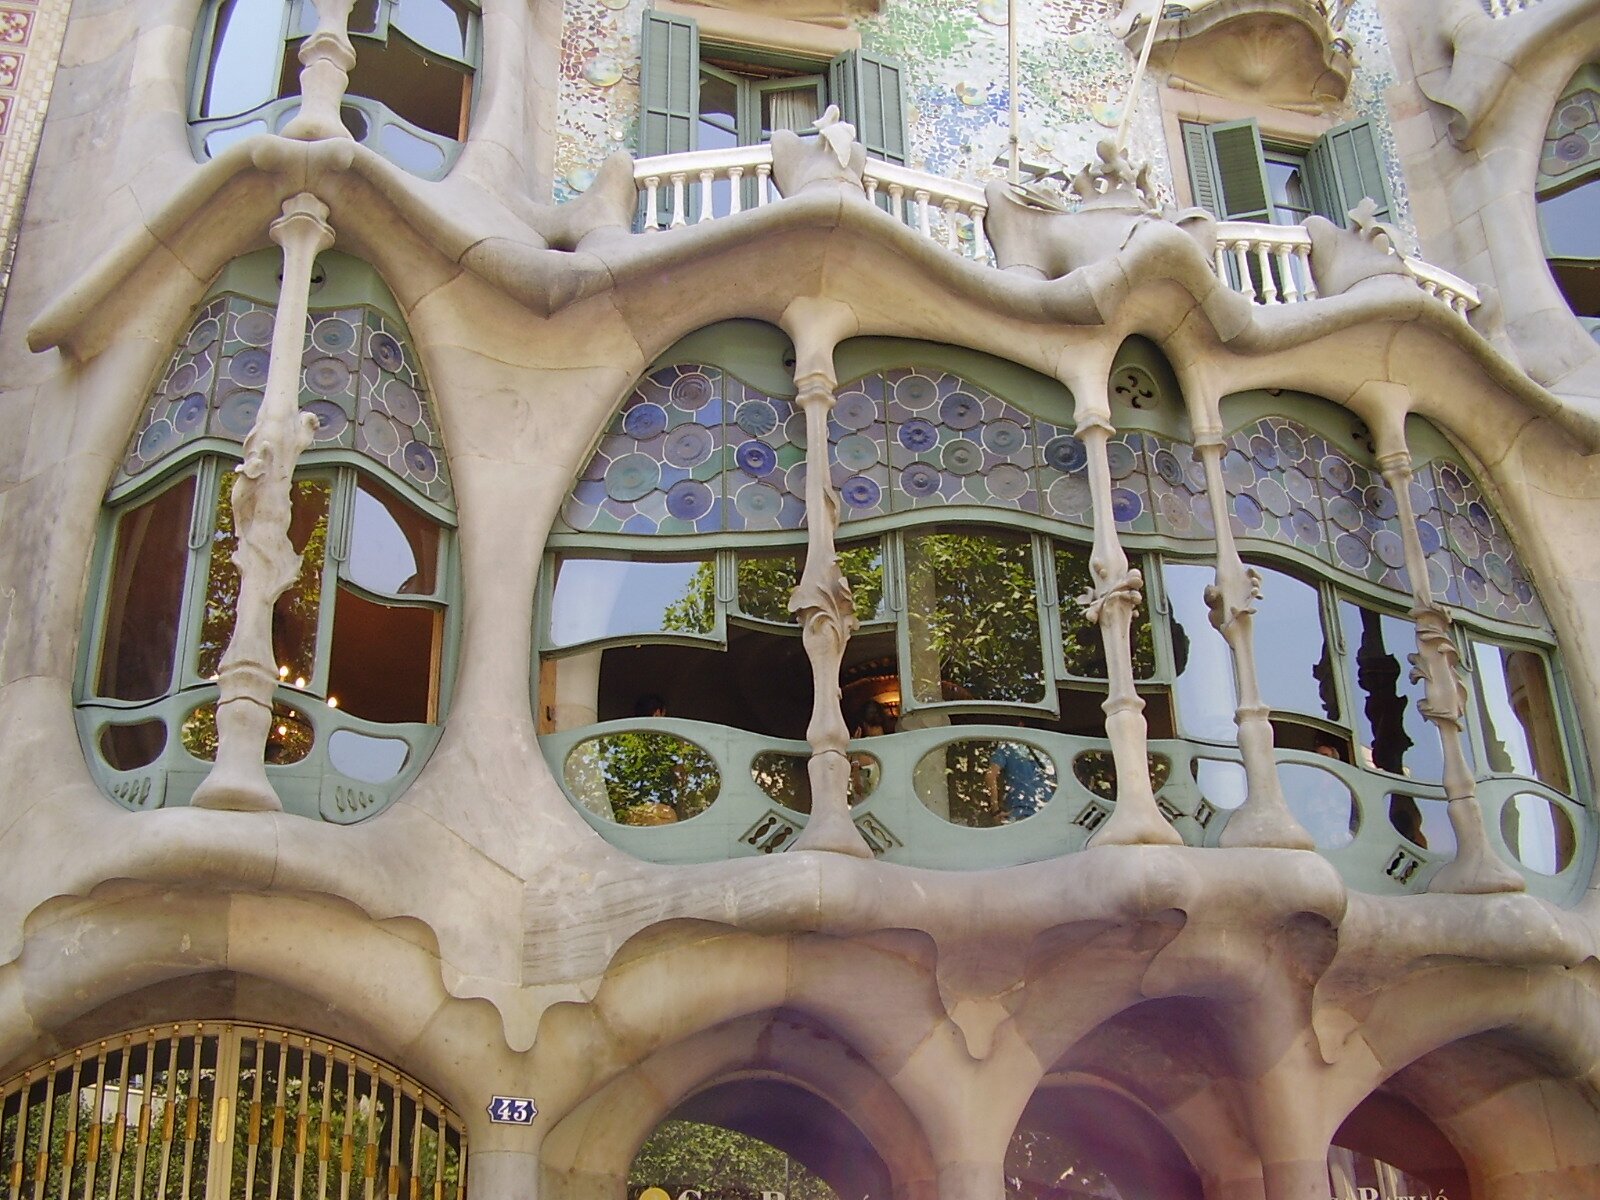 What to see near Barcelona: 8 ideas for day trips